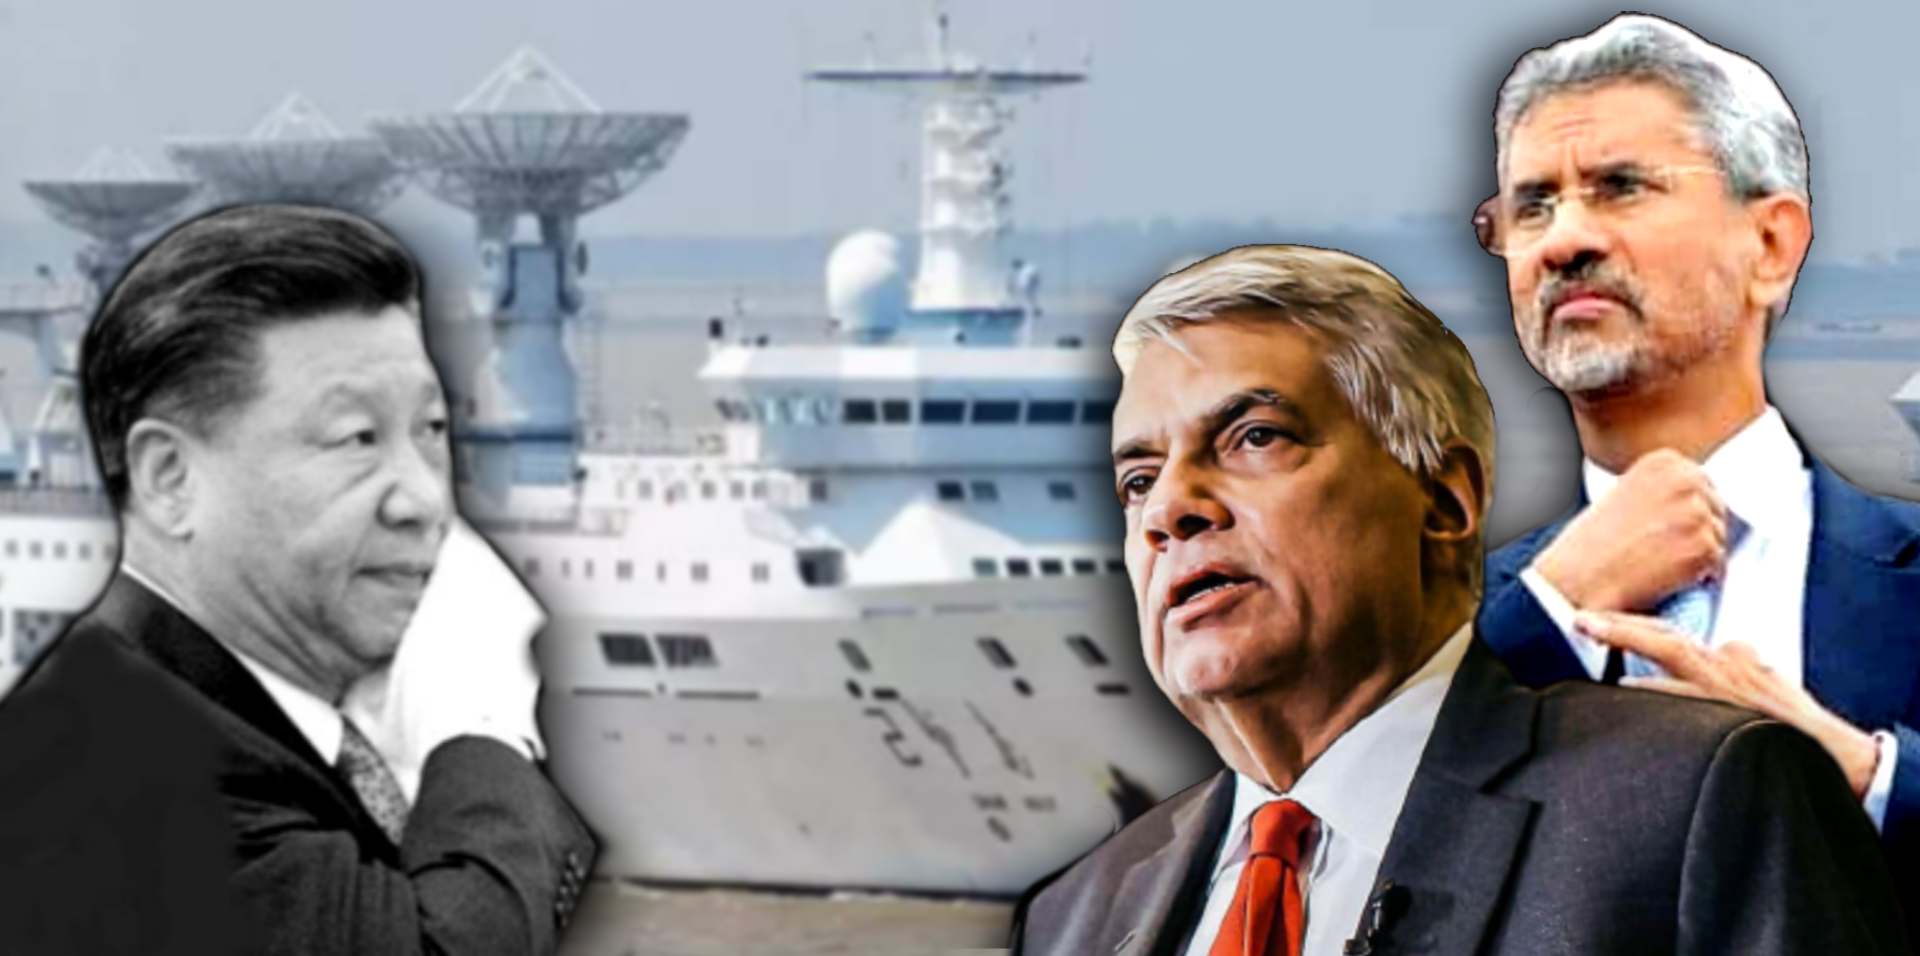 A move by Jaishankar and the Chinese ‘spy ship’ out of Sri Lanka
TOU